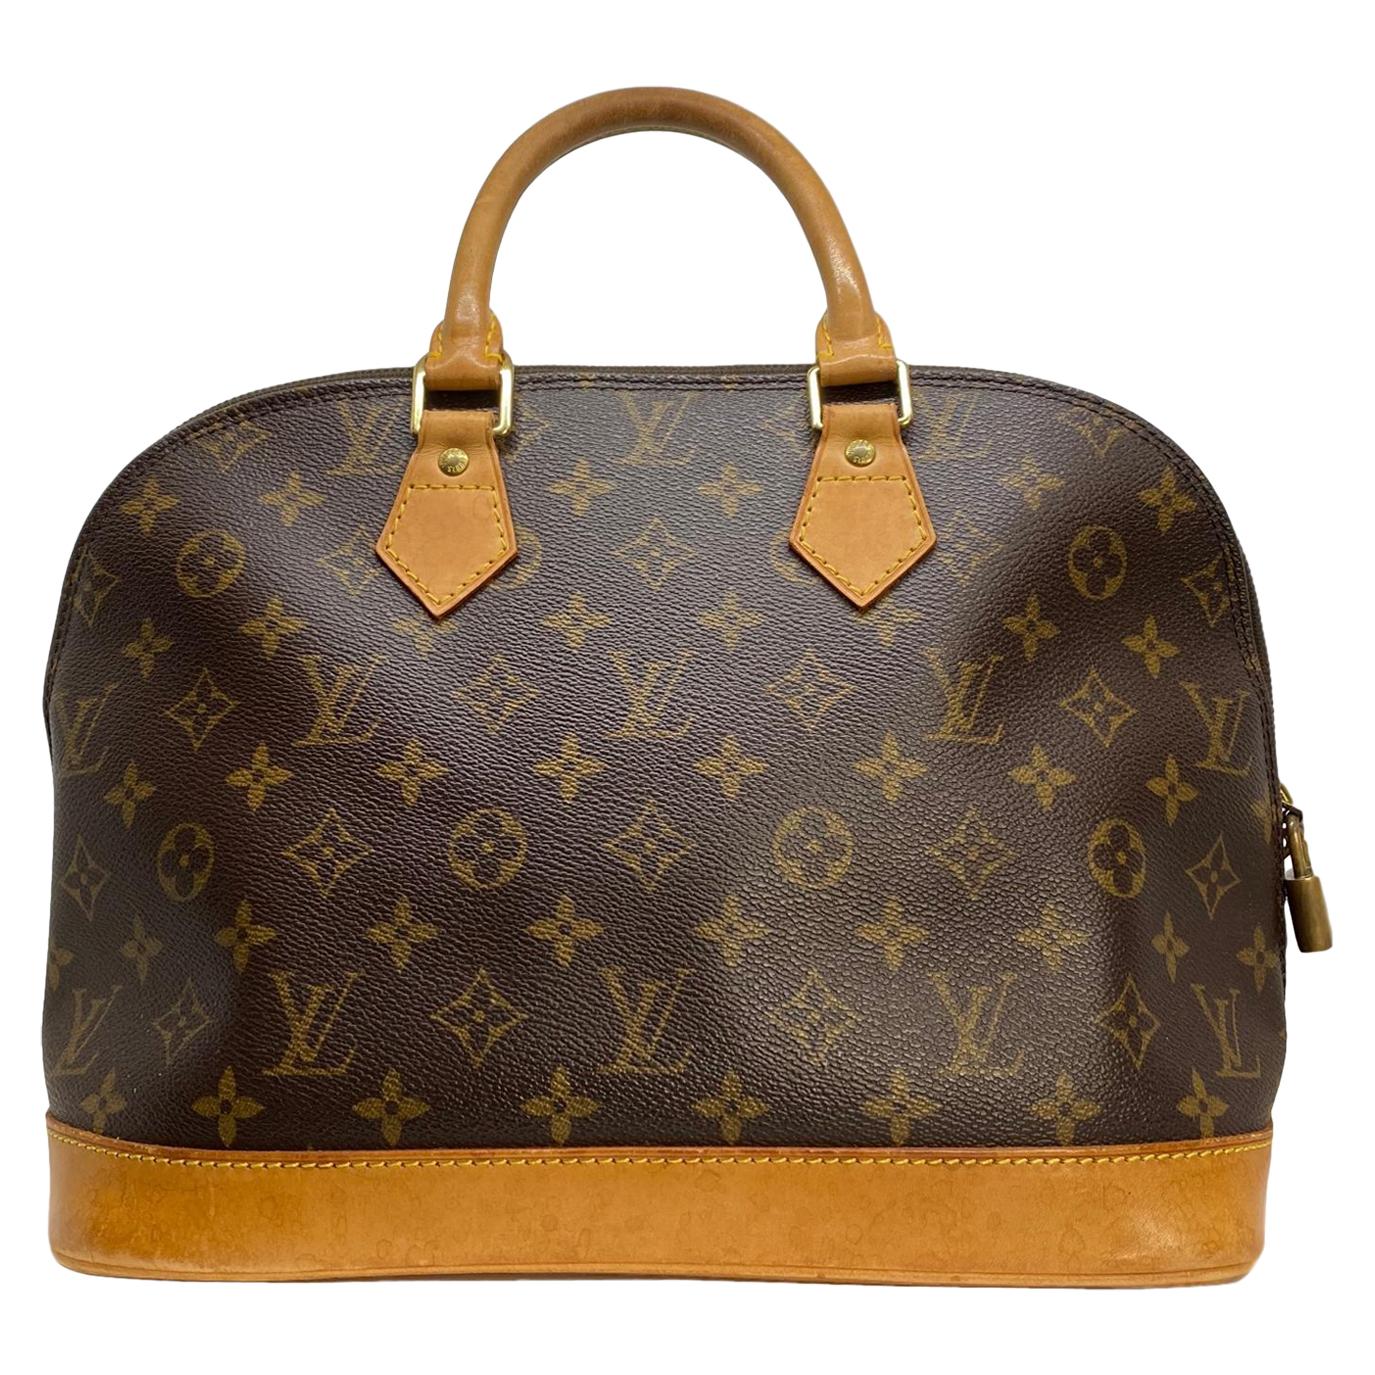 LOUIS VUITTON Alma PM Review & What It Holds